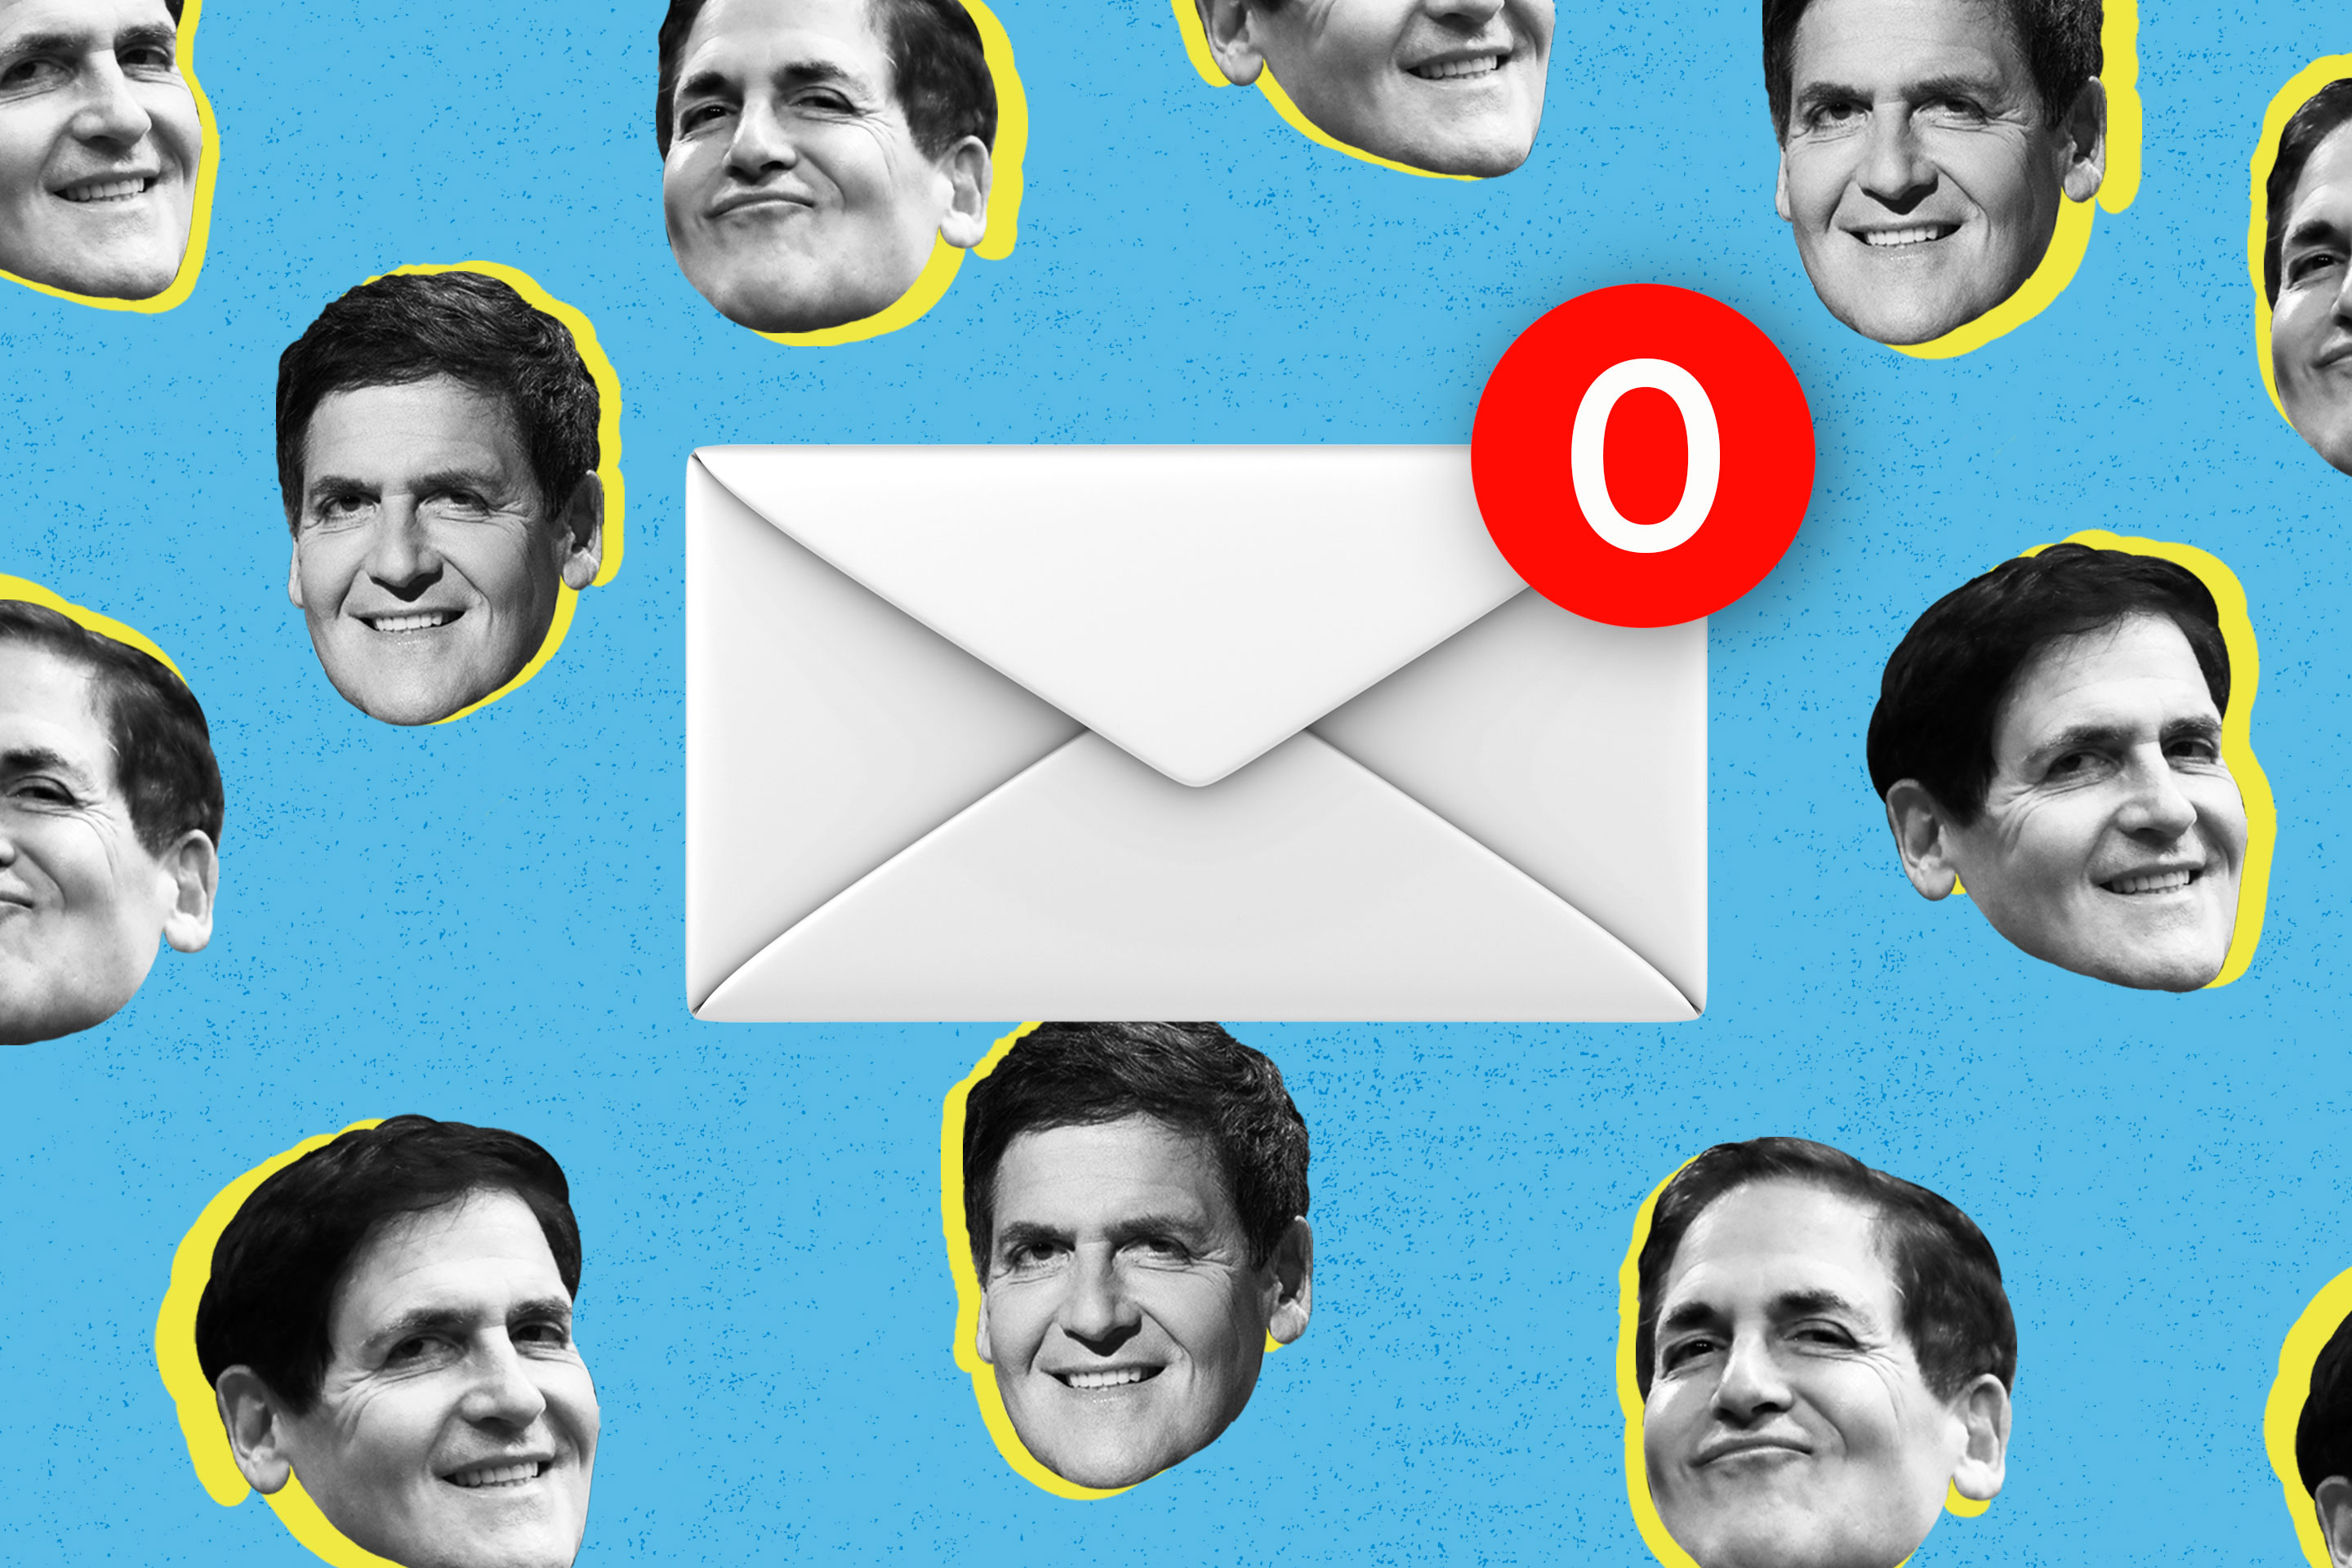 Mark Cuban Gets 1,000 Emails a Day. Here's the Old-School Trick He Uses to Manage Them All